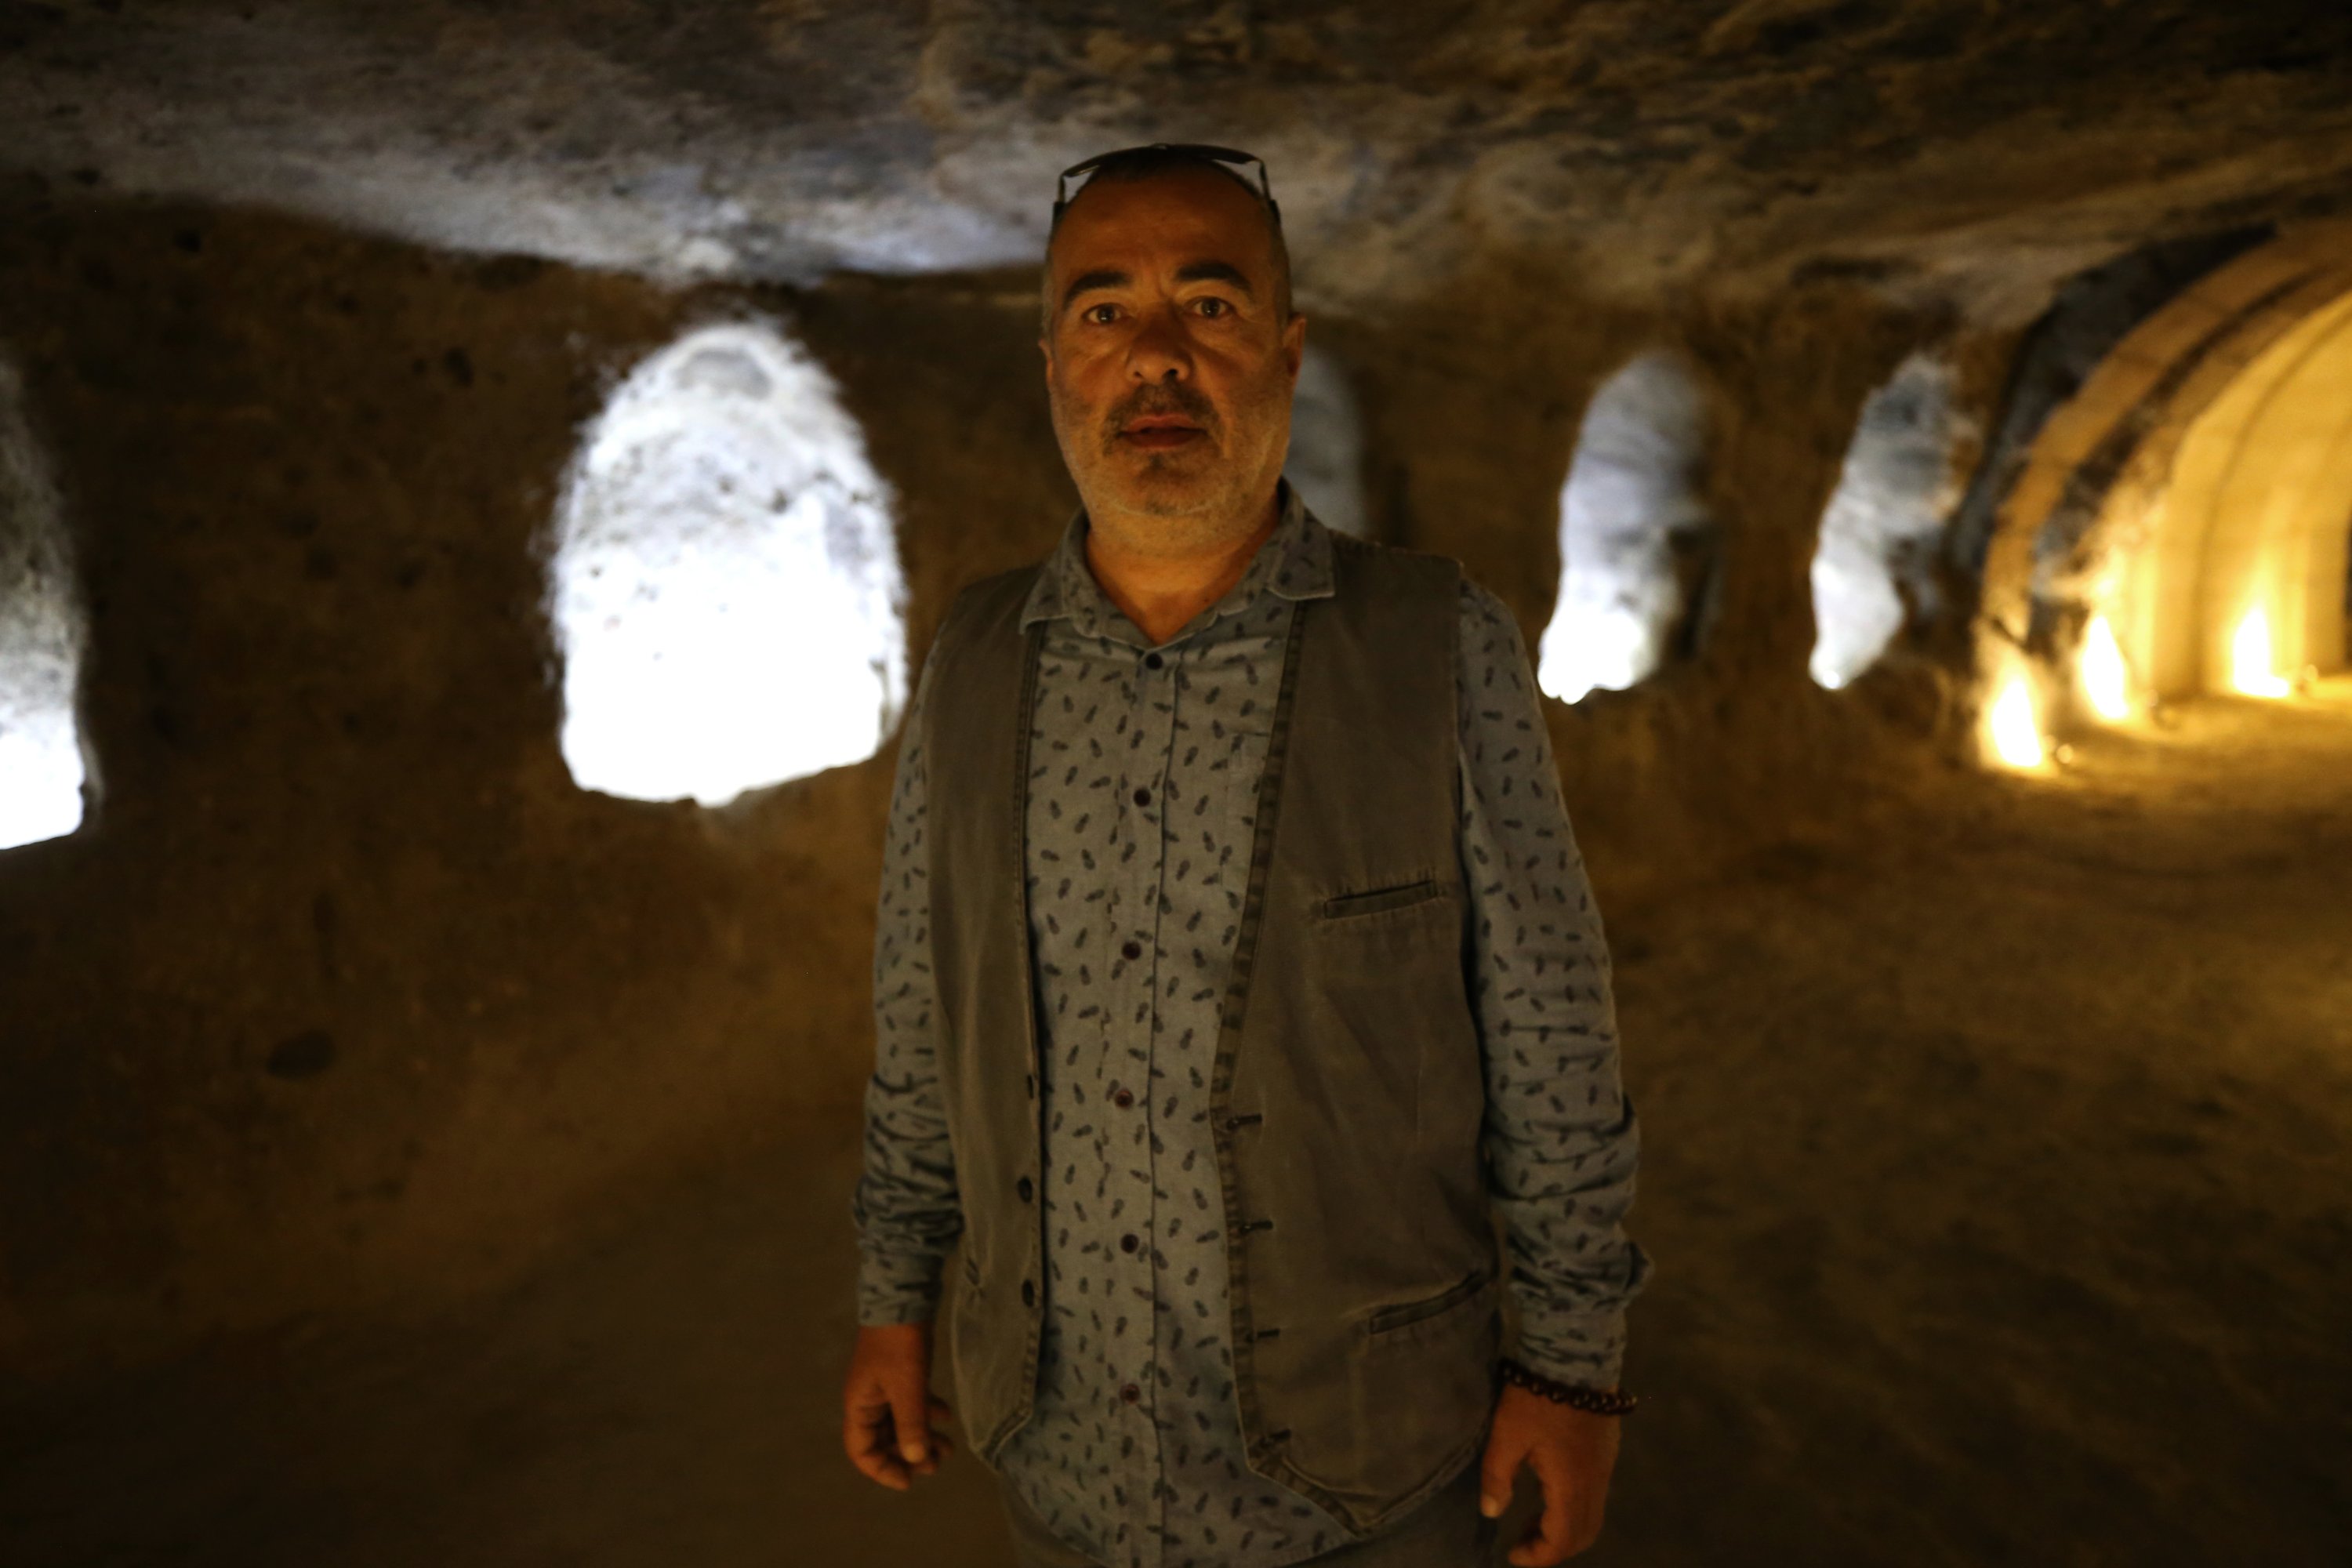 Archaeologist Semih Istanbulluoğlu in Kayaşehir, a historical rock-carved hillside settlement in Nevşehir that will welcome tourists from the first week of May, Cappadocia, Turkey, April 25, 2022. (AA Photo)